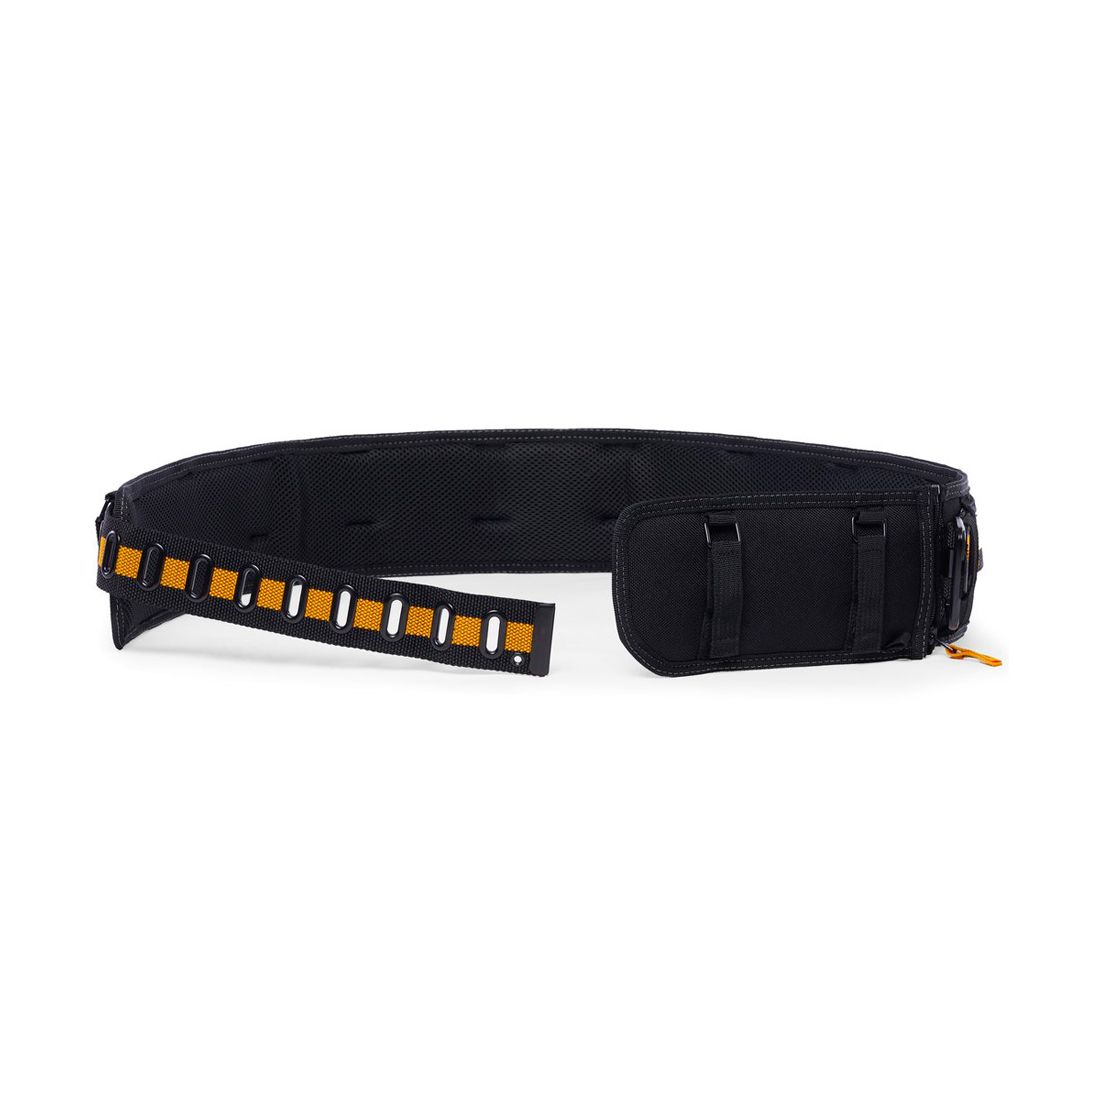 Toughbuilt Pro Padded Belt with Steel Buckle TB-CT-40P